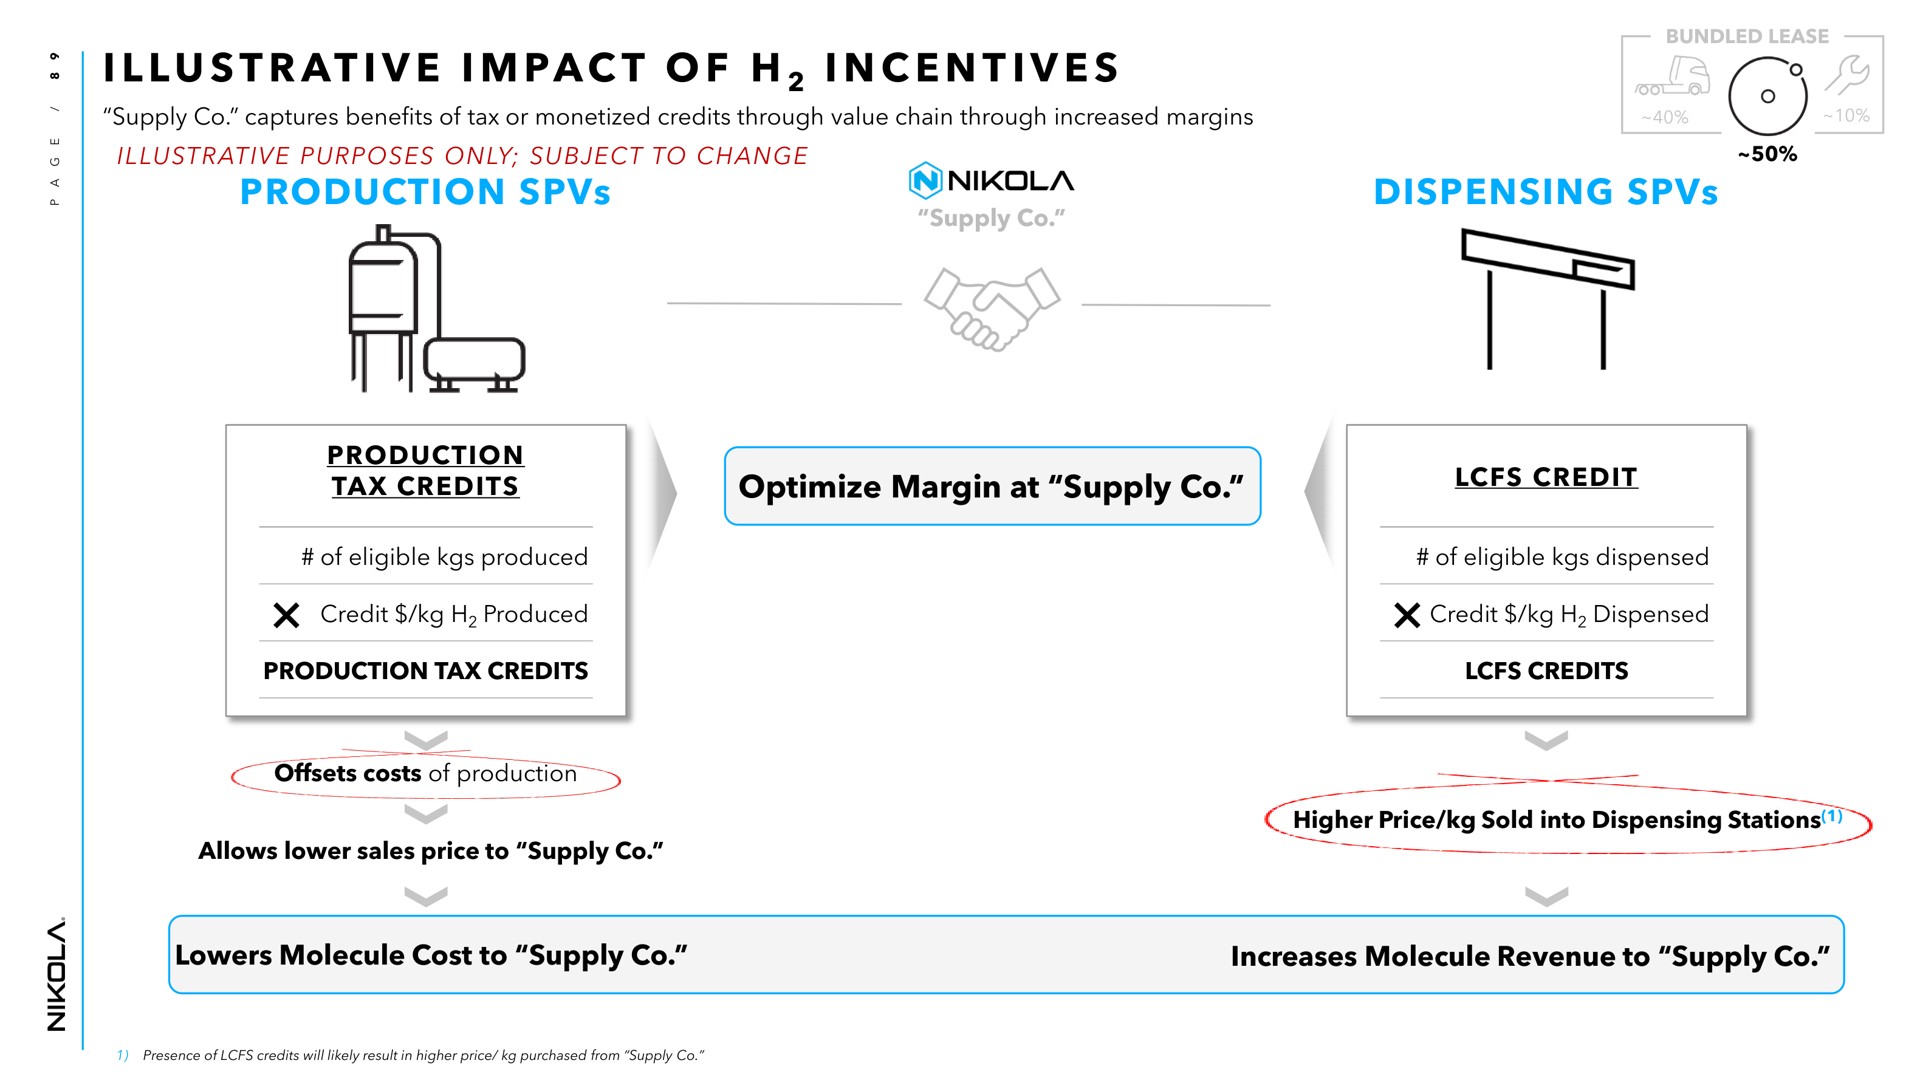 i at i i i i production dispensing optimize margin at supply illustrative impact of incentives tax credits offsets costs of allows lower sales price to credit nape higher lowers molecule cost to increases molecule revenue to | Nikola